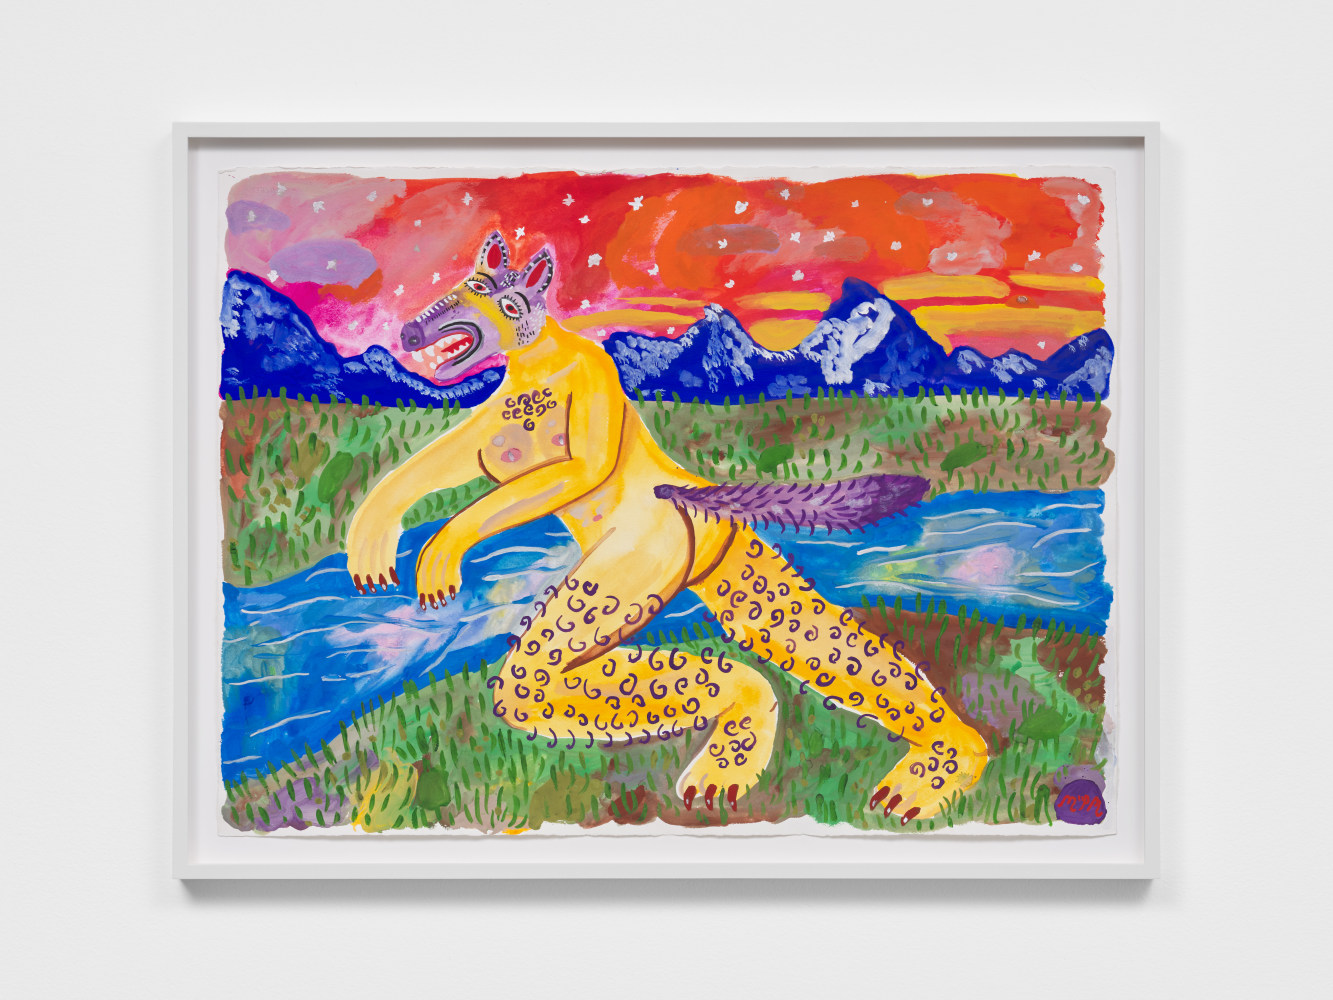 Coyote, 2023
gouache on paper
image: 22 1/2 &amp;times; 29 3/4 in. / 57.1 &amp;times; 75.6 cm
framed: 26 1/2 &amp;times; 33 3/4 in. / 67.3 &amp;times; 85.7 cm